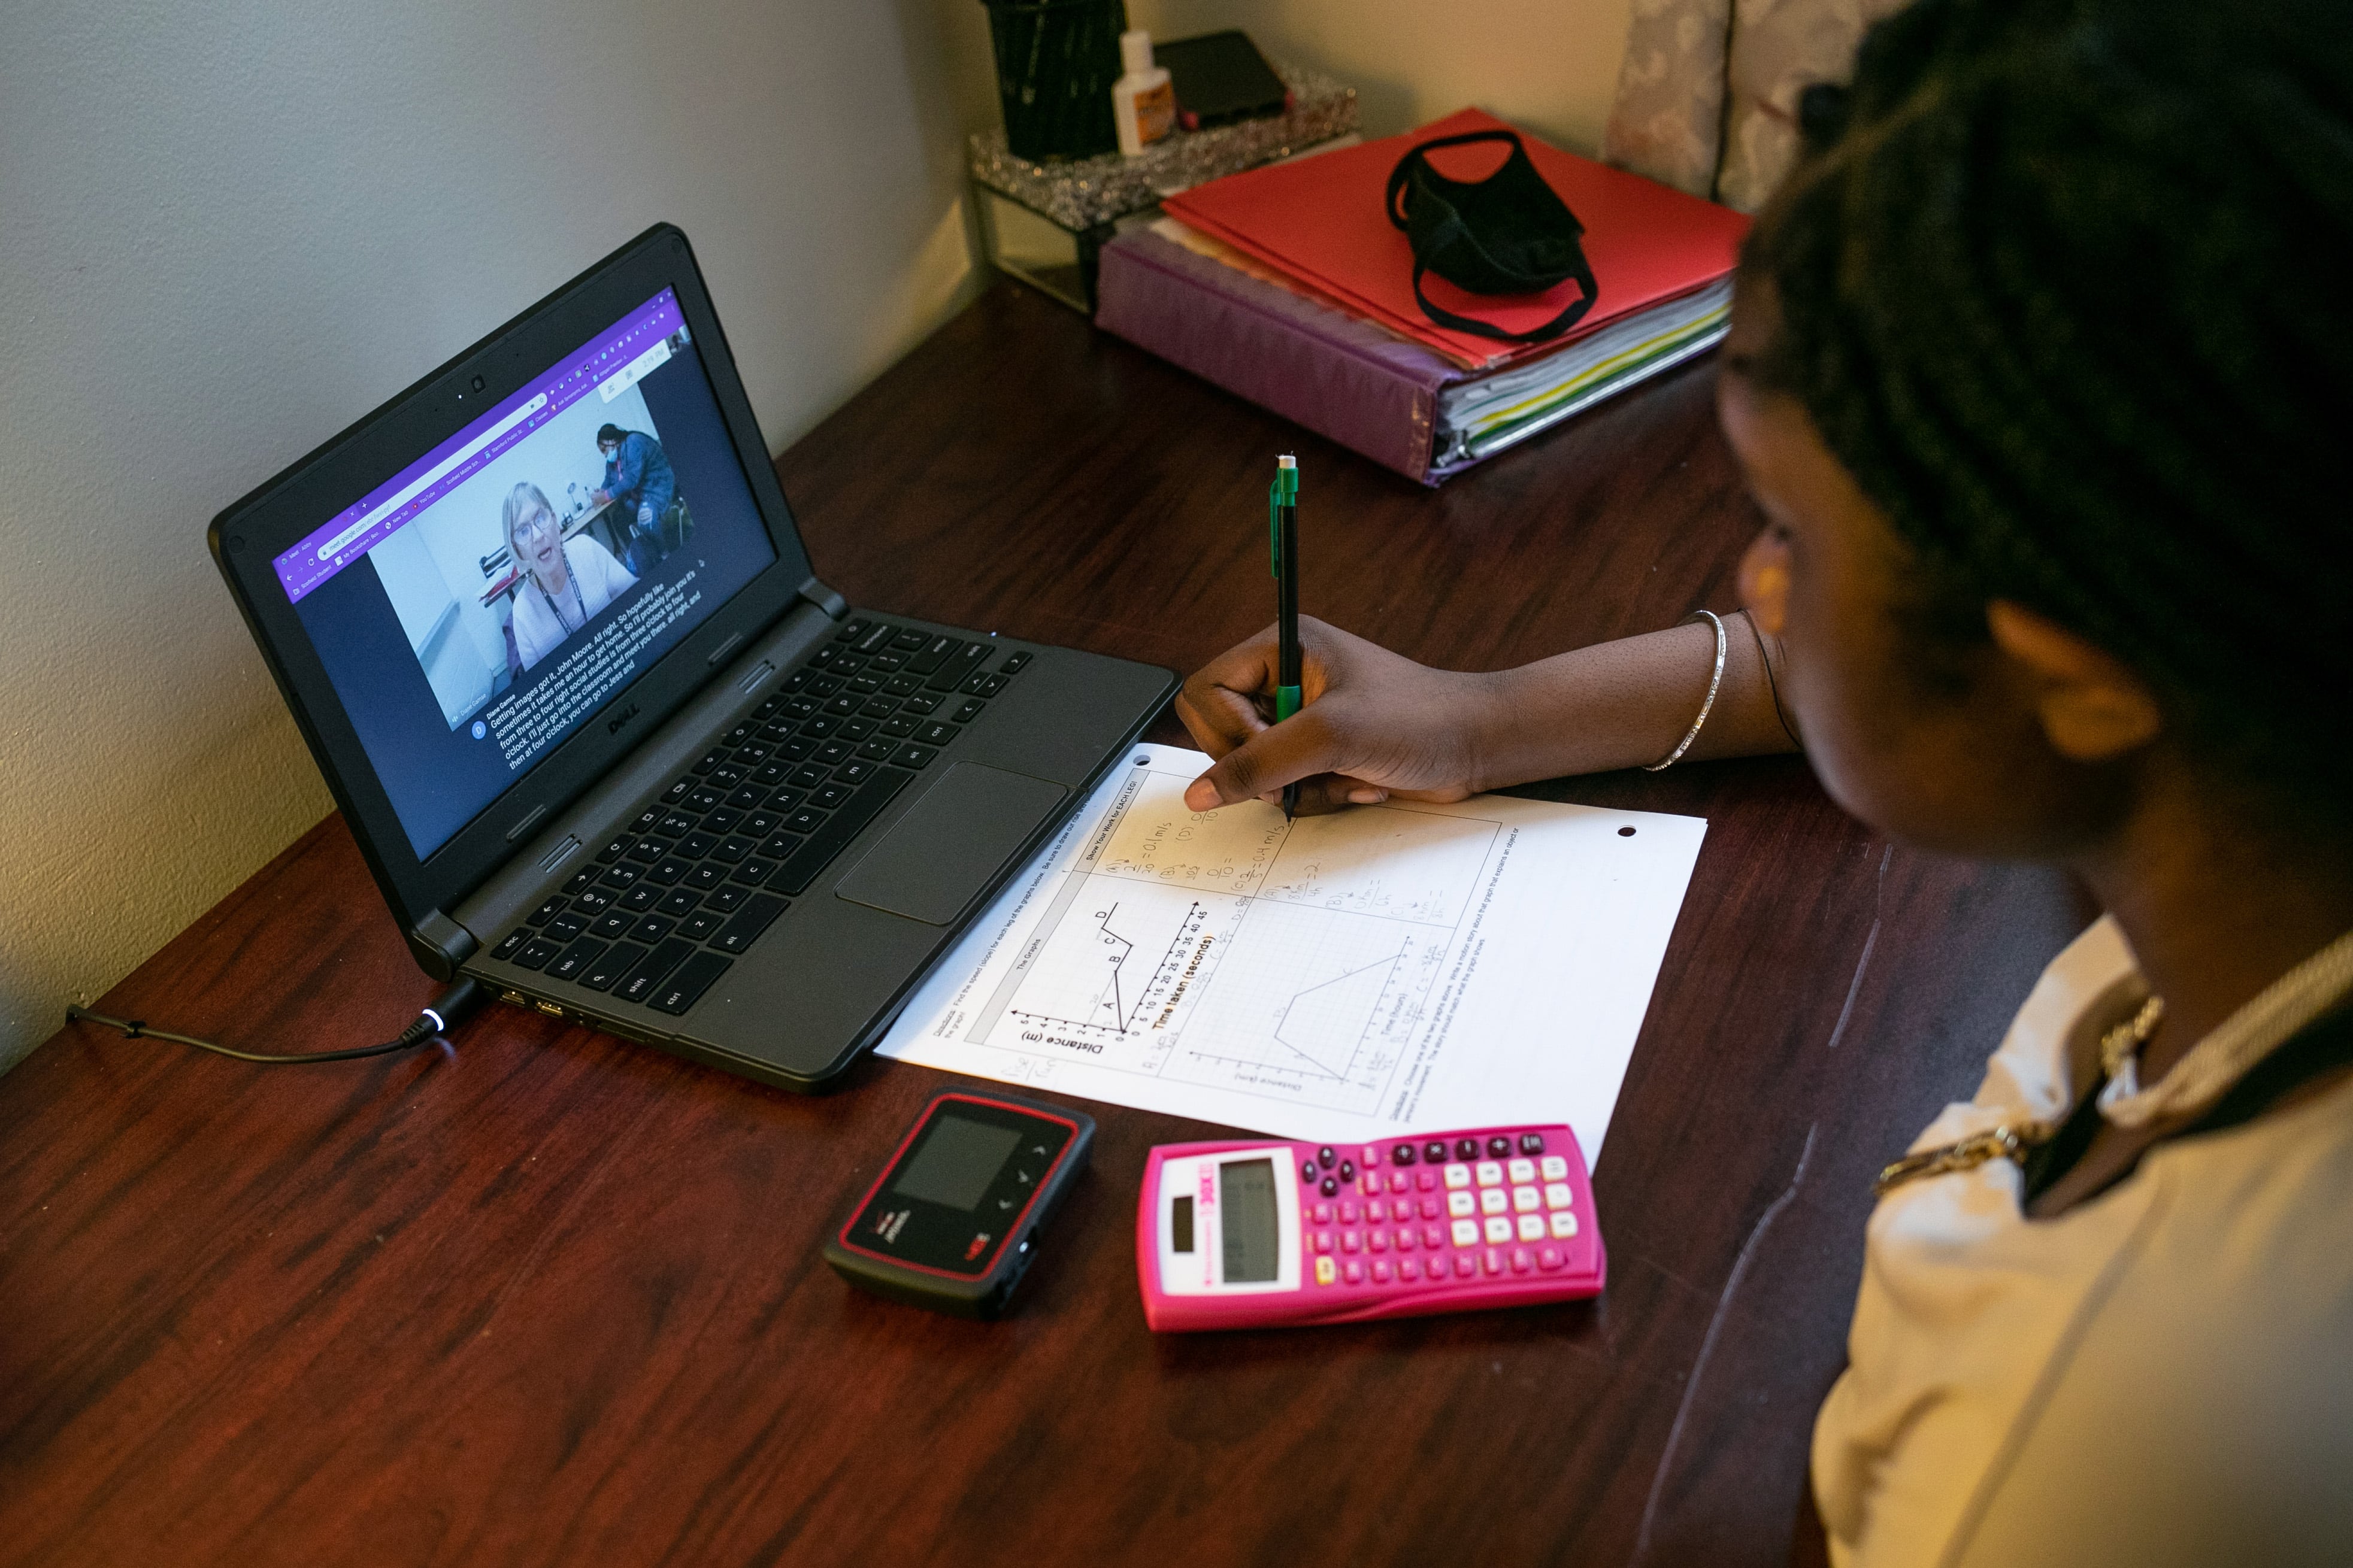 A Deaf student works with a teacher over her laptop at home. She is writing notes next to a pink calculator.